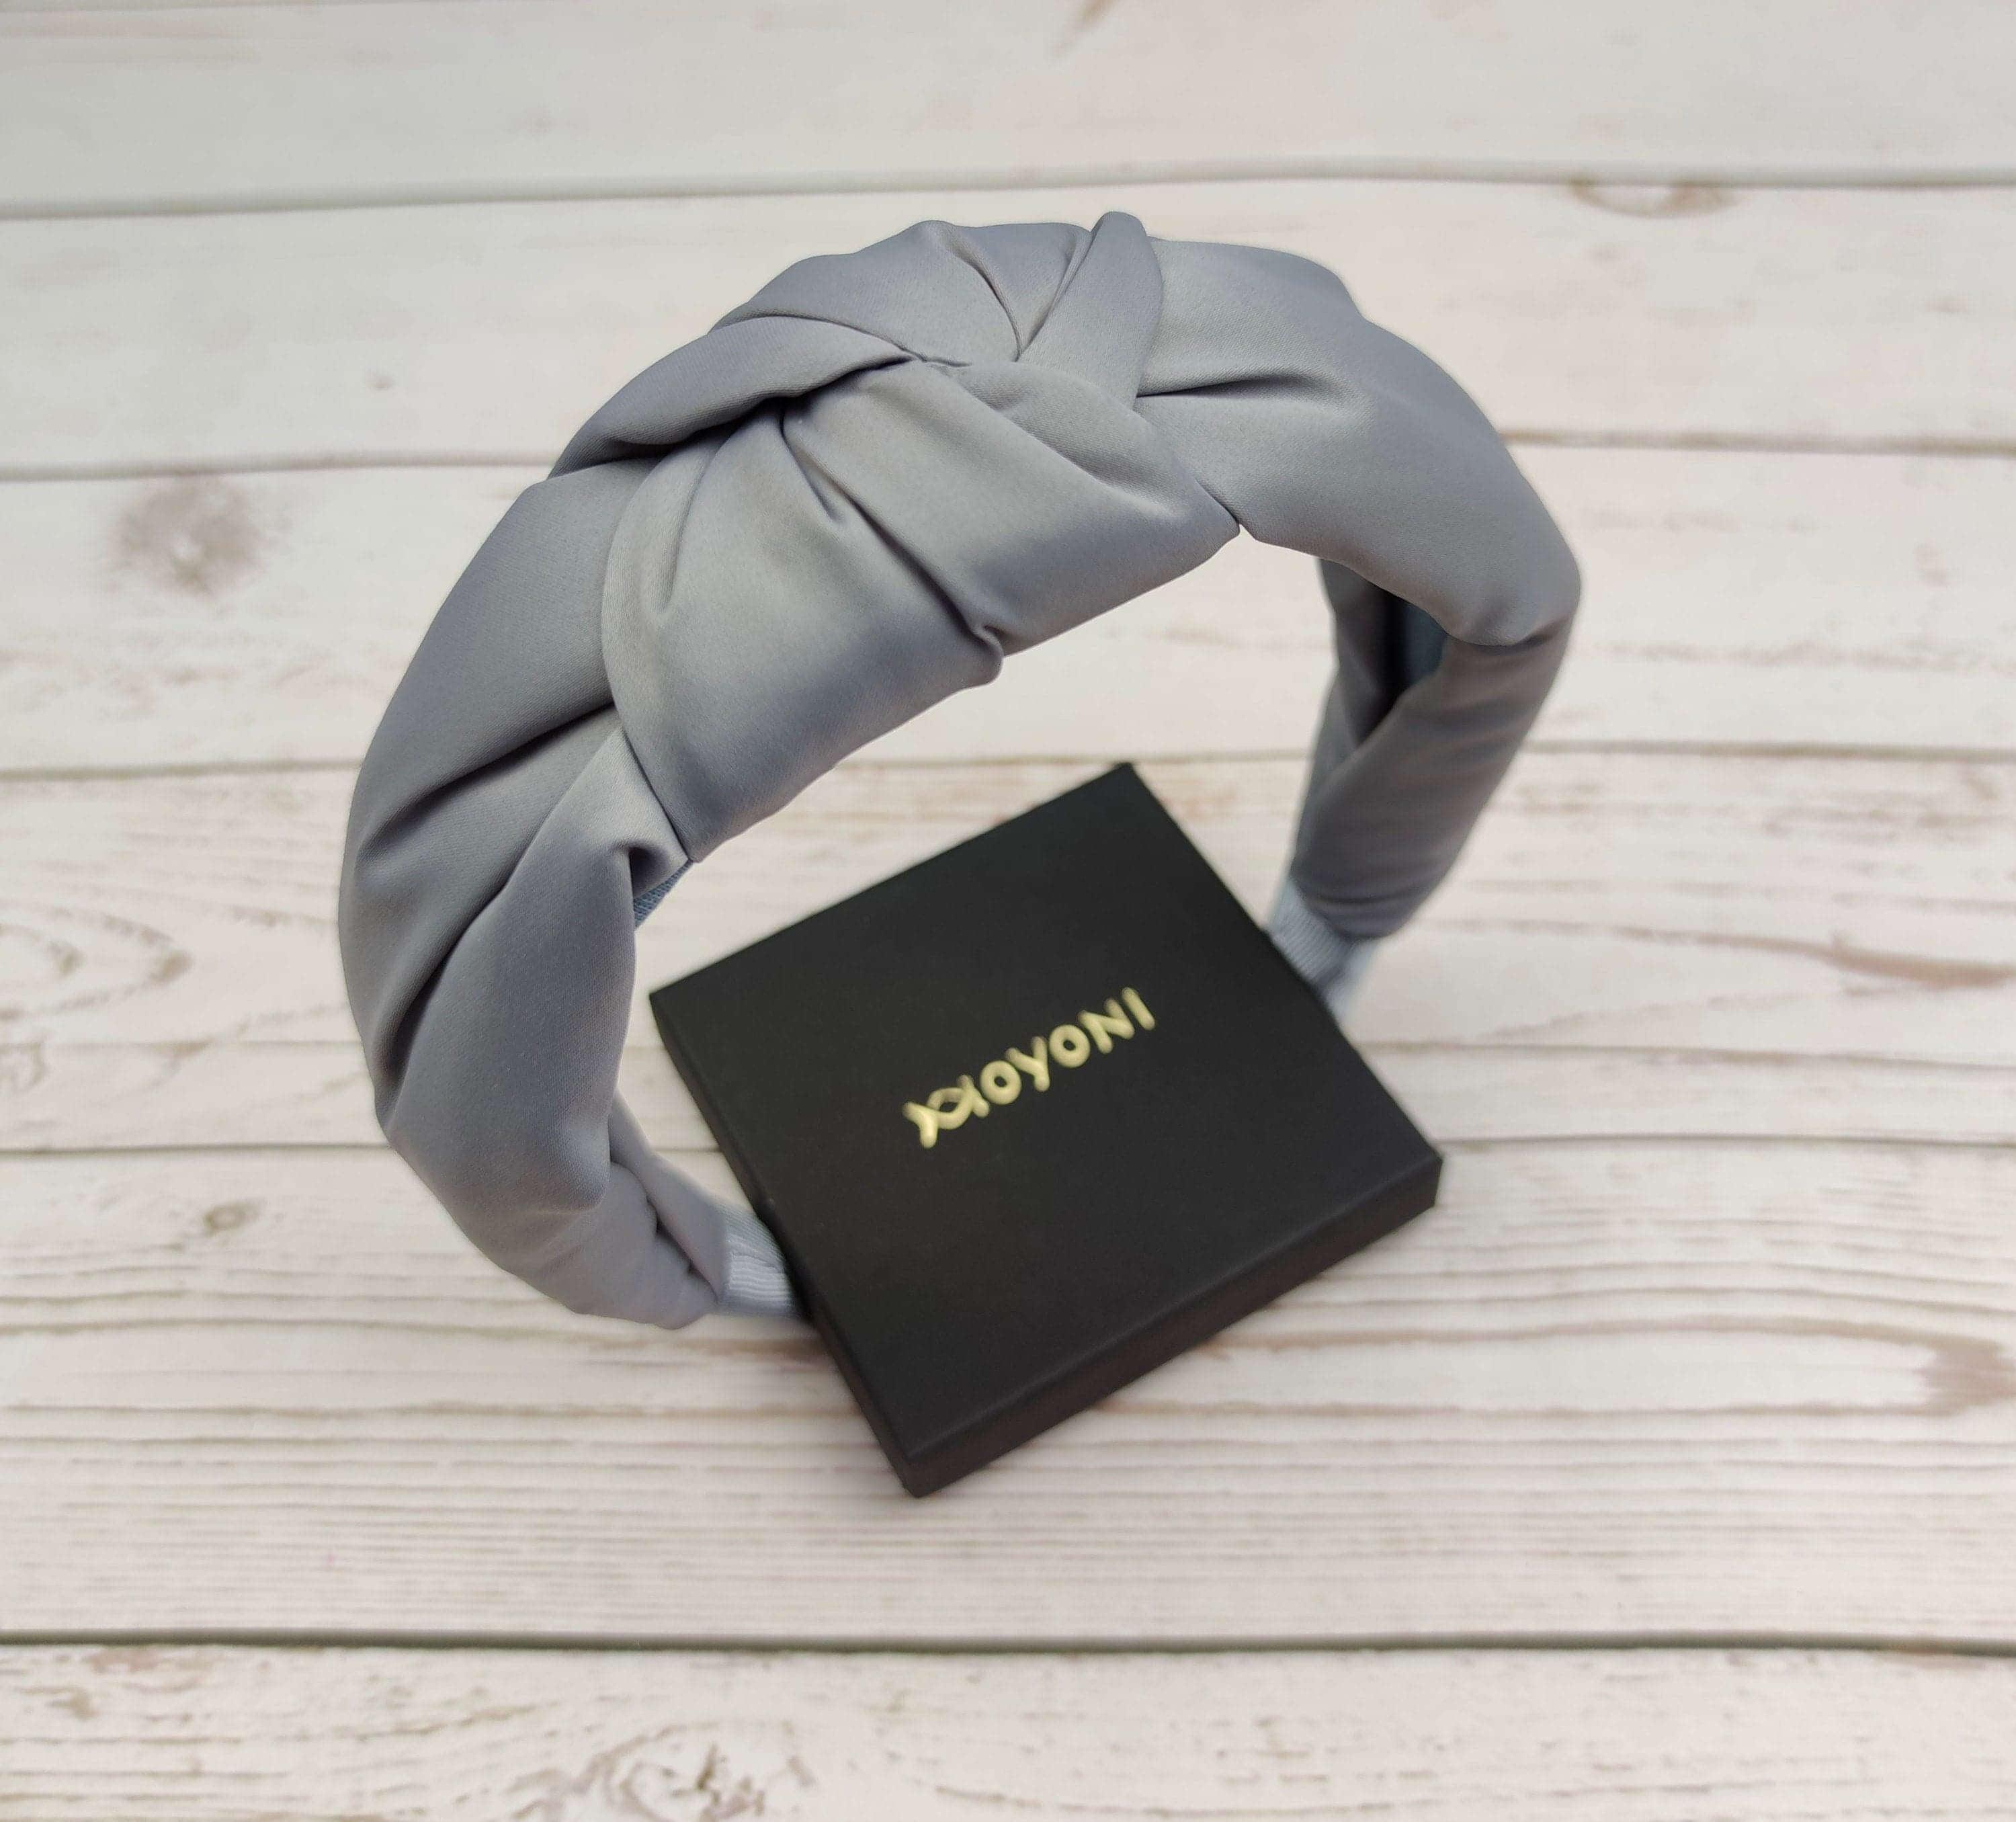 Premium Grey Satin Padded Headband for Women - Elegant and Wide Classic Hairband available at Moyoni Design